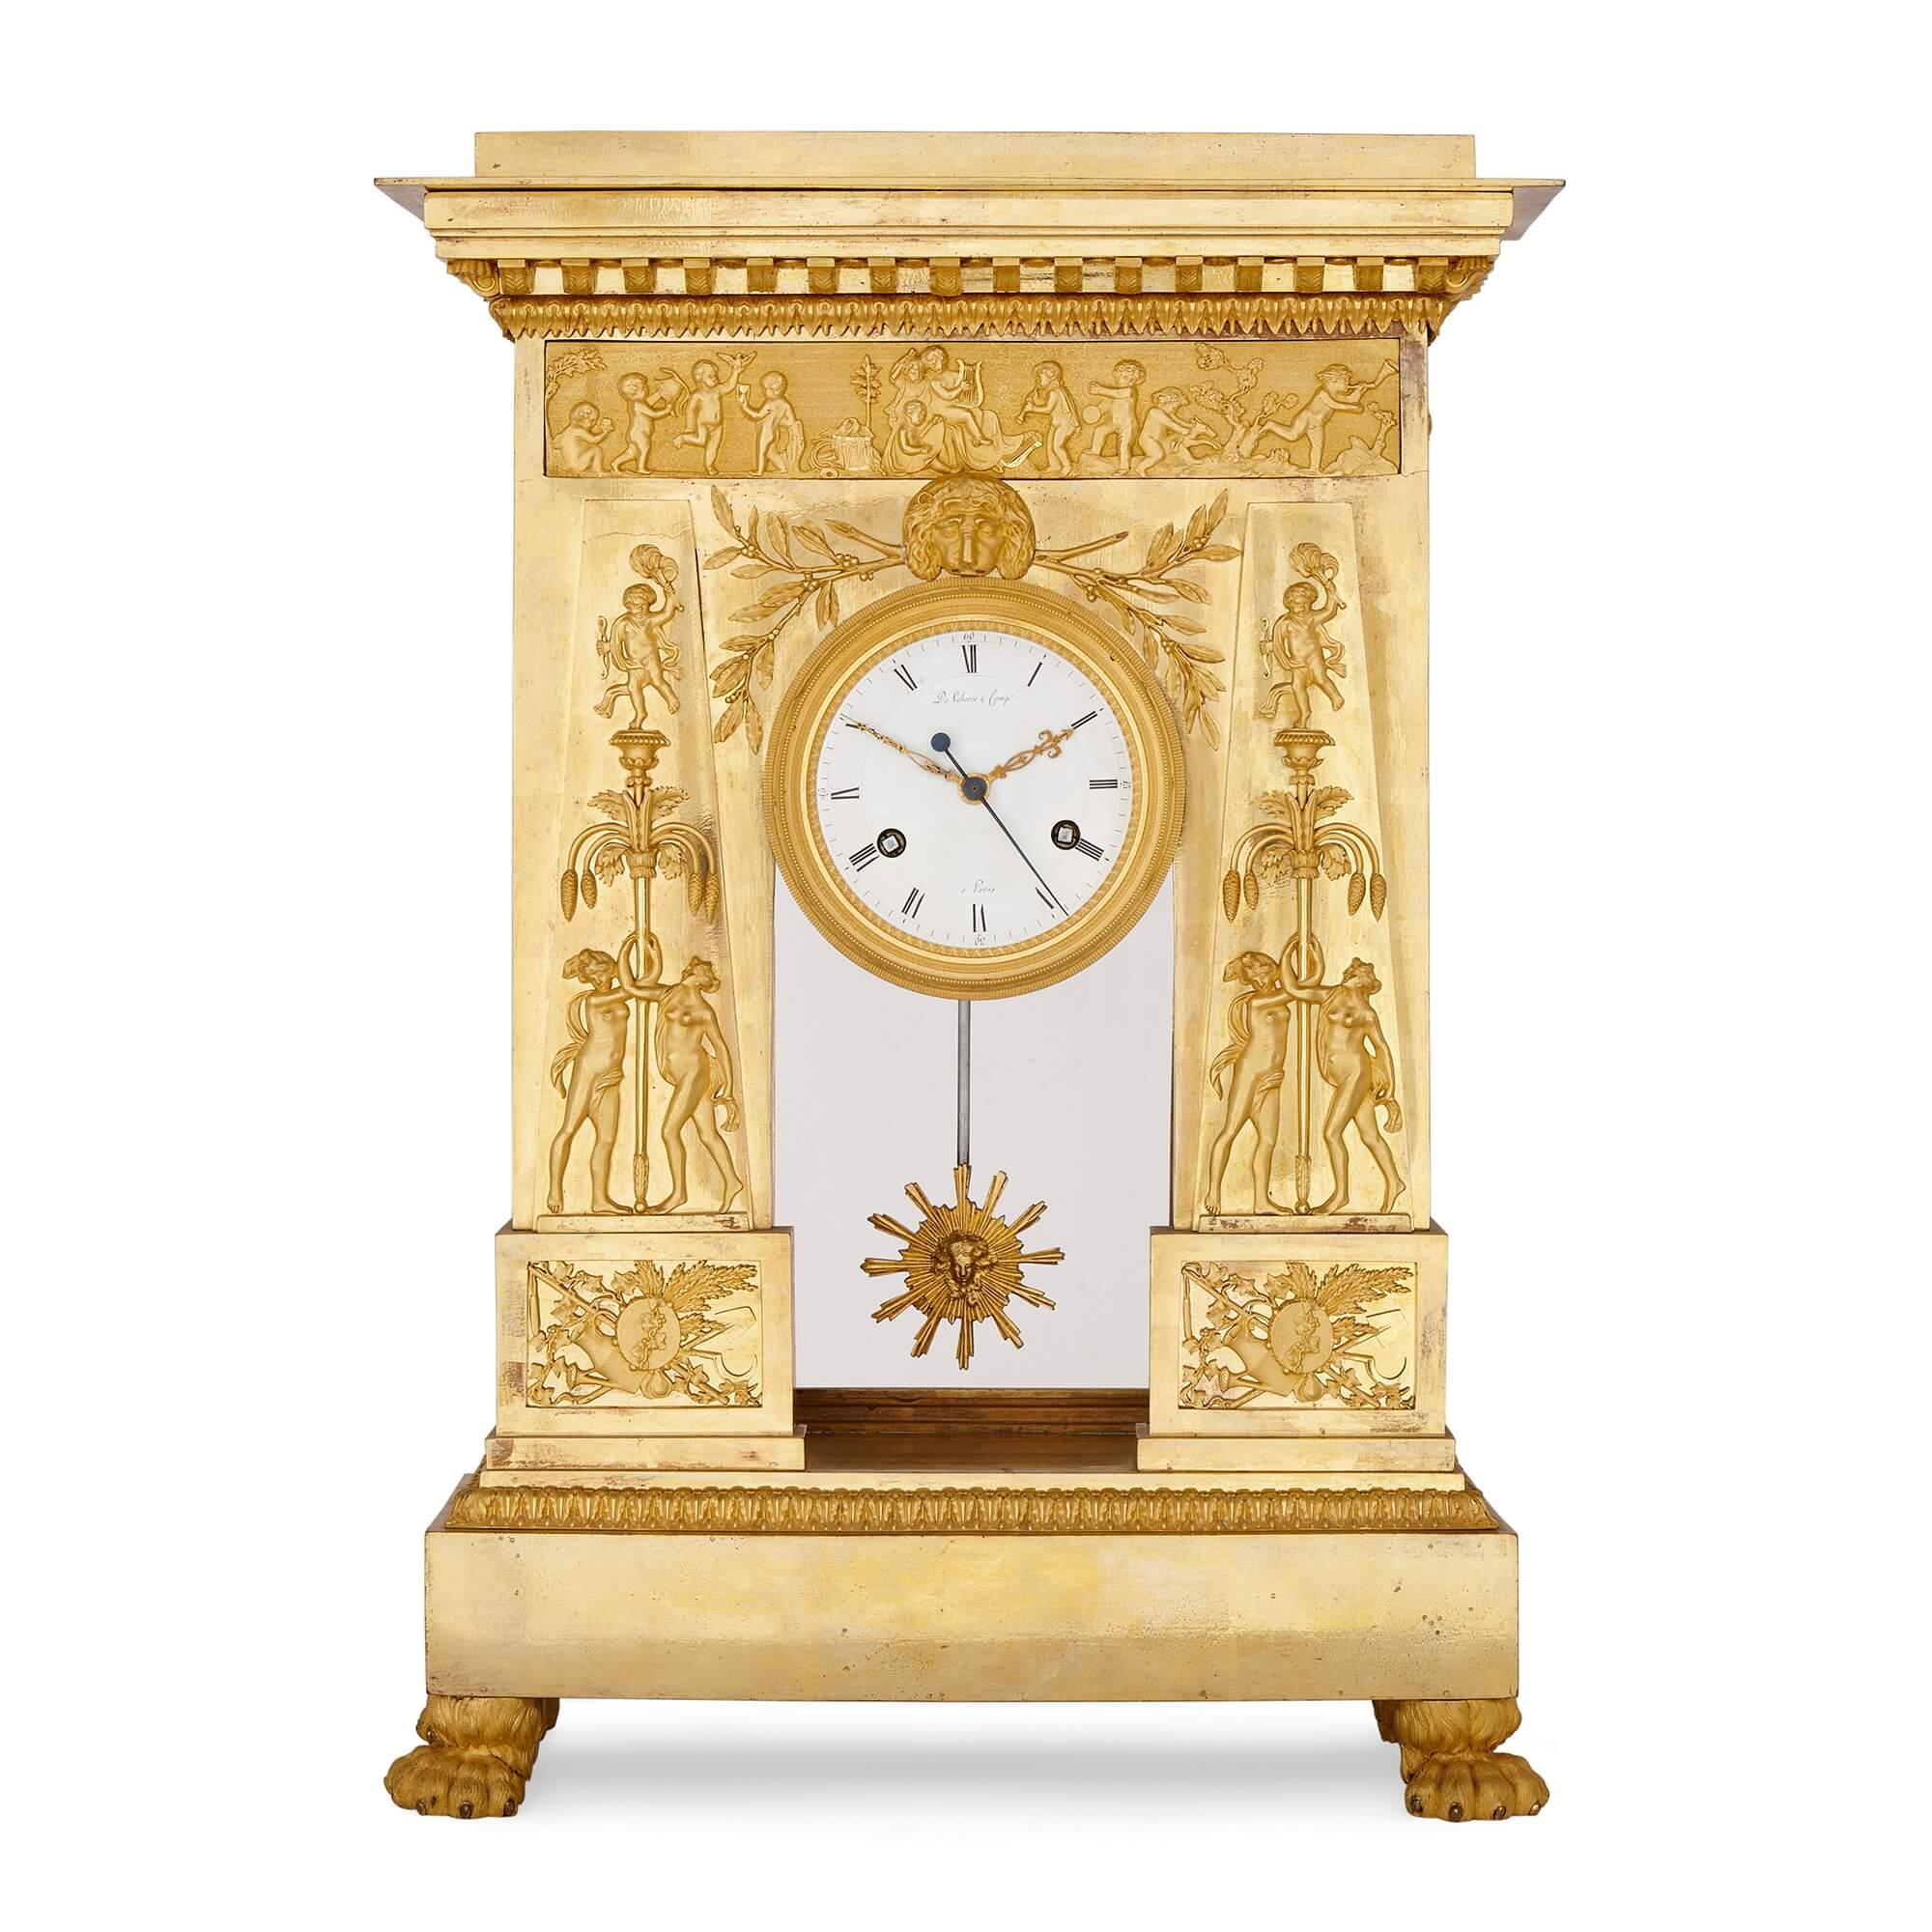 Antique Empire period gilt-bronze mantel clock by Deverberie
French, c.1805
Measures: Height 67cm, width 54cm, depth 19cm

This exceptional timepiece was made in Empire period France by the highly successful and important Parisian bronzier